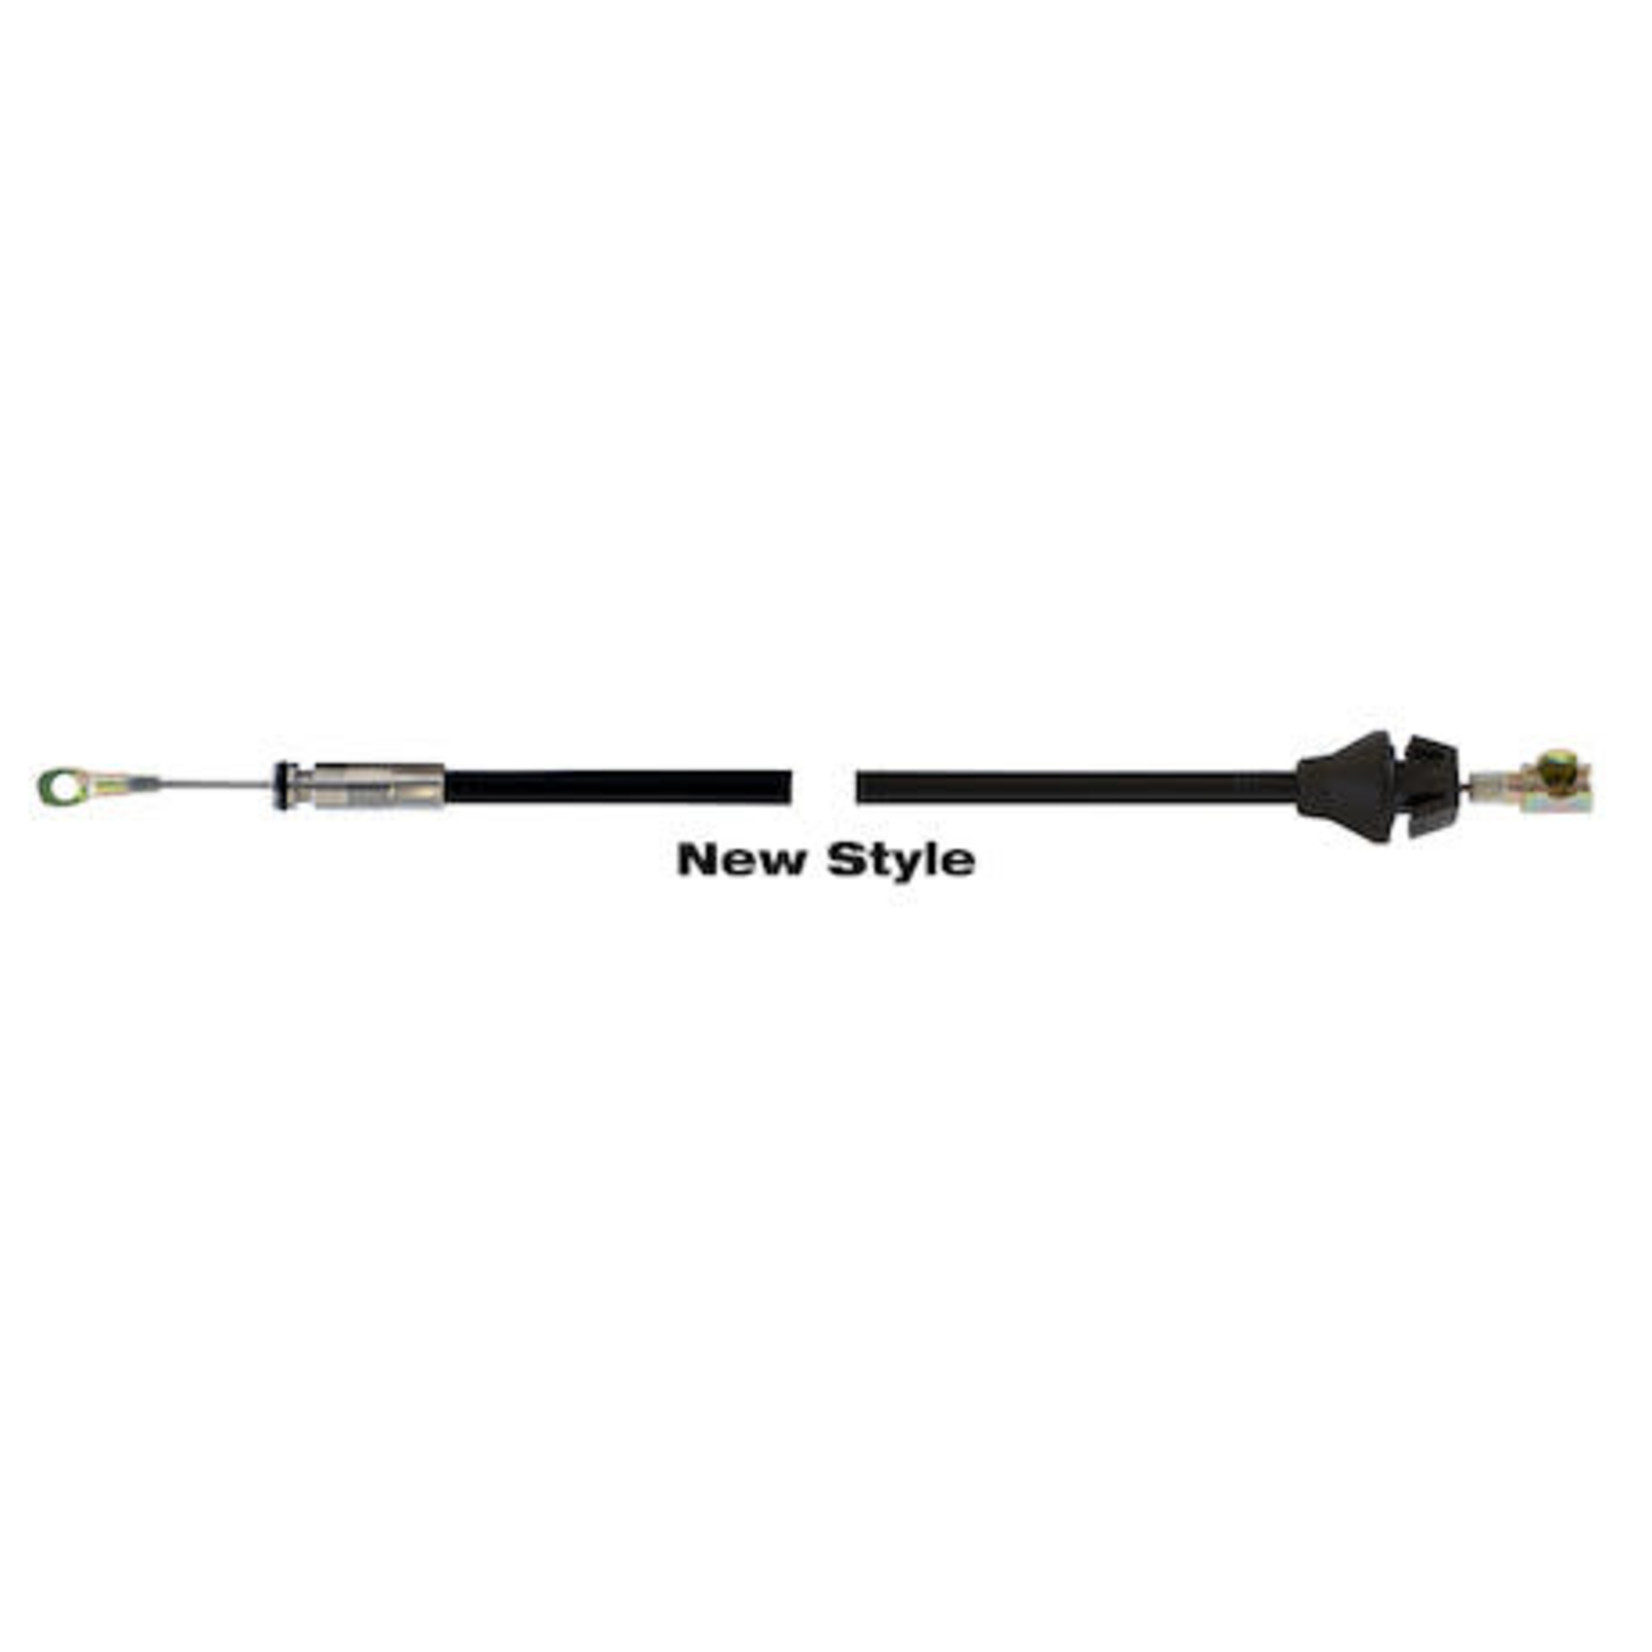 SAM  SAM "New Style" Control Cable to fit Western® Snow Plows